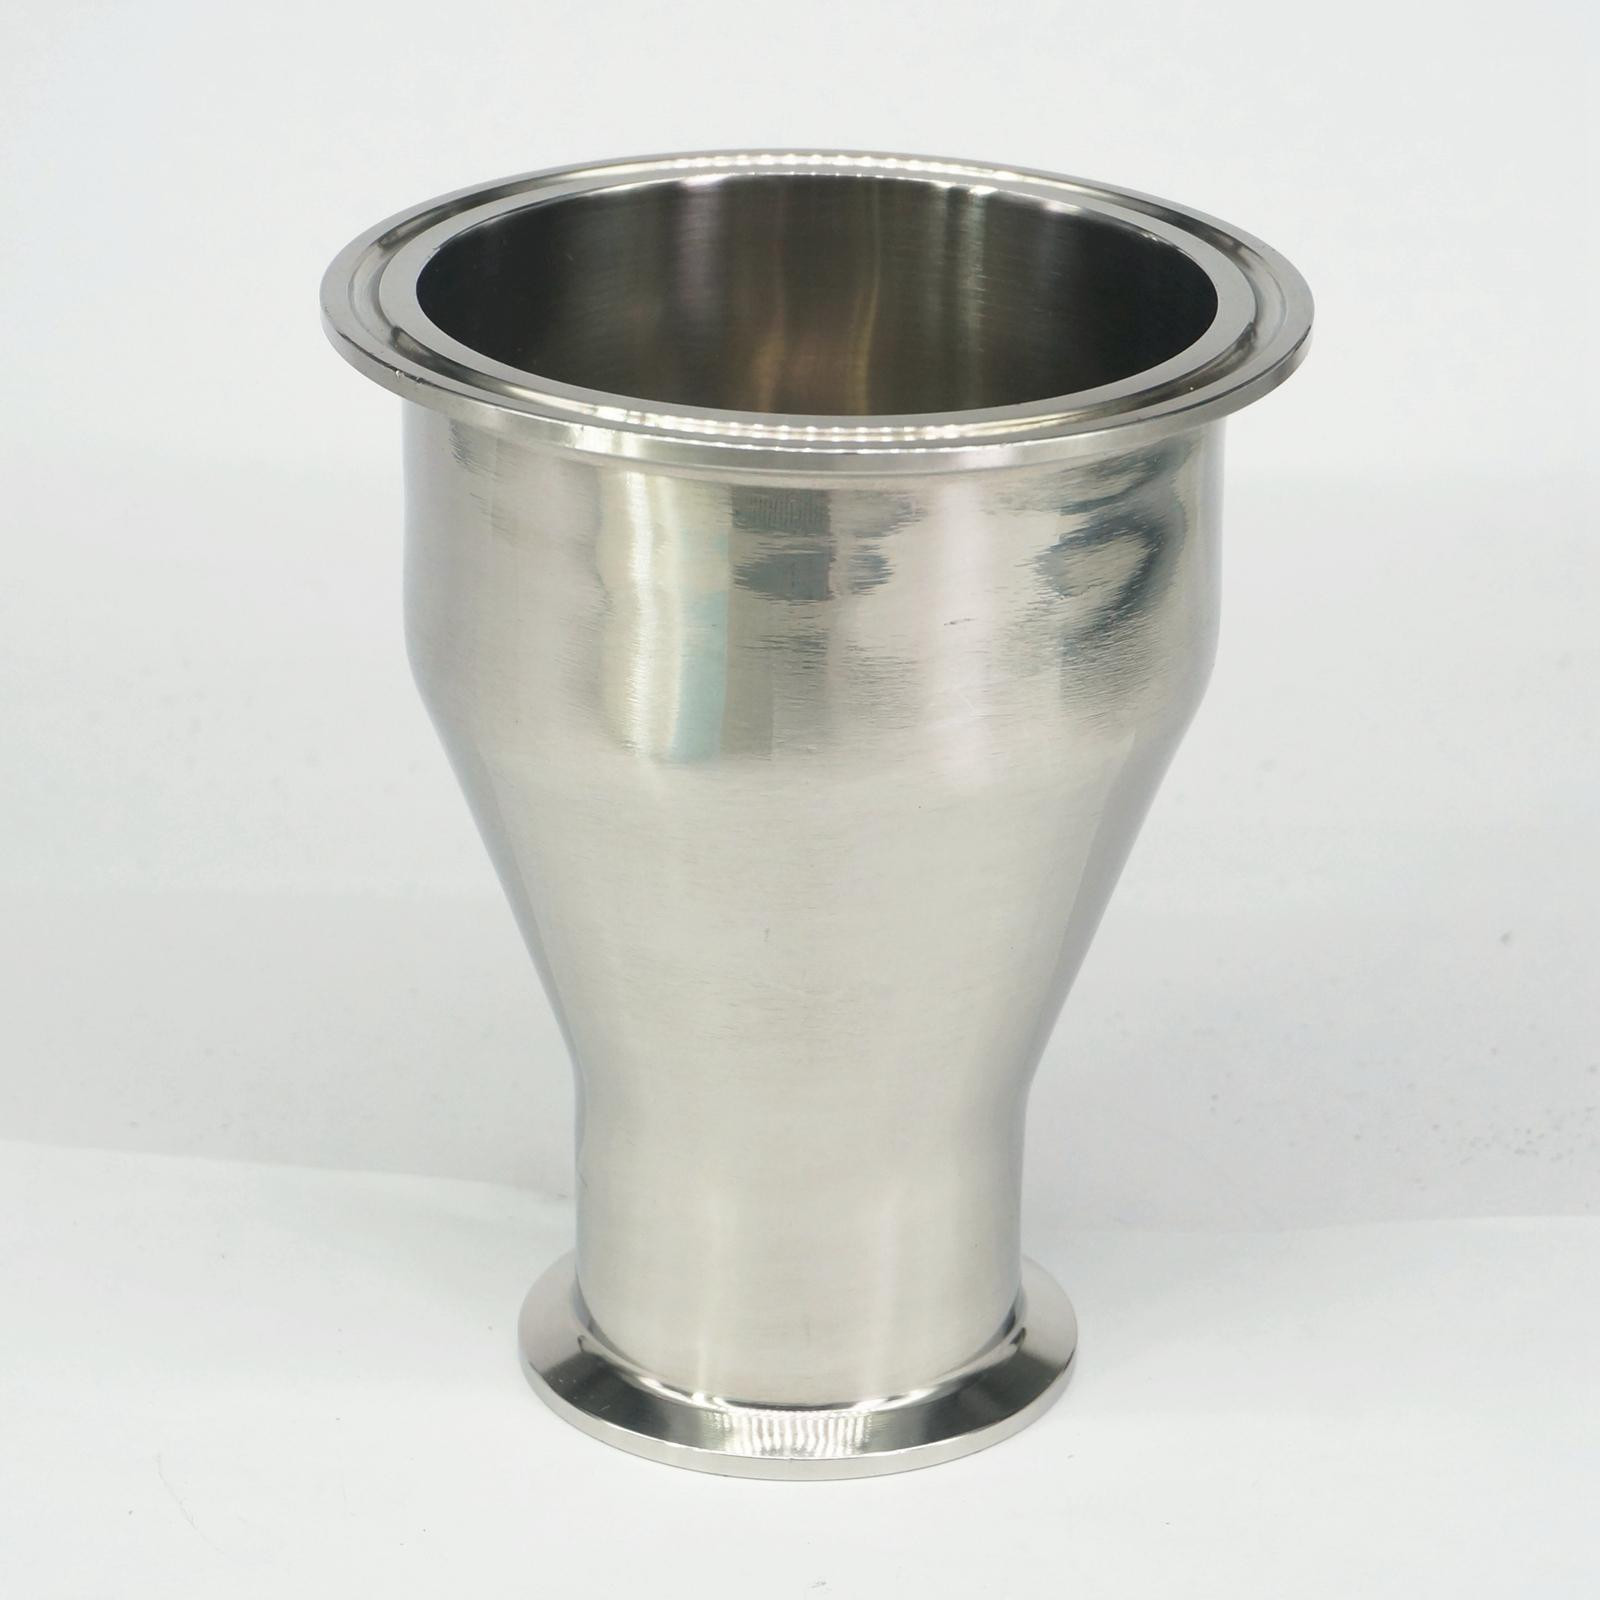 21 Lovely 5x5 Glass Cylinder Vase 2024 free download 5x5 glass cylinder vase of 1 1 4 hose tail barb 304 stainless steel type e plug camlock pertaining to 89mm to 51mm pipe od 3 5 to 2 tri clamp sus304 sanitary reducer fitting